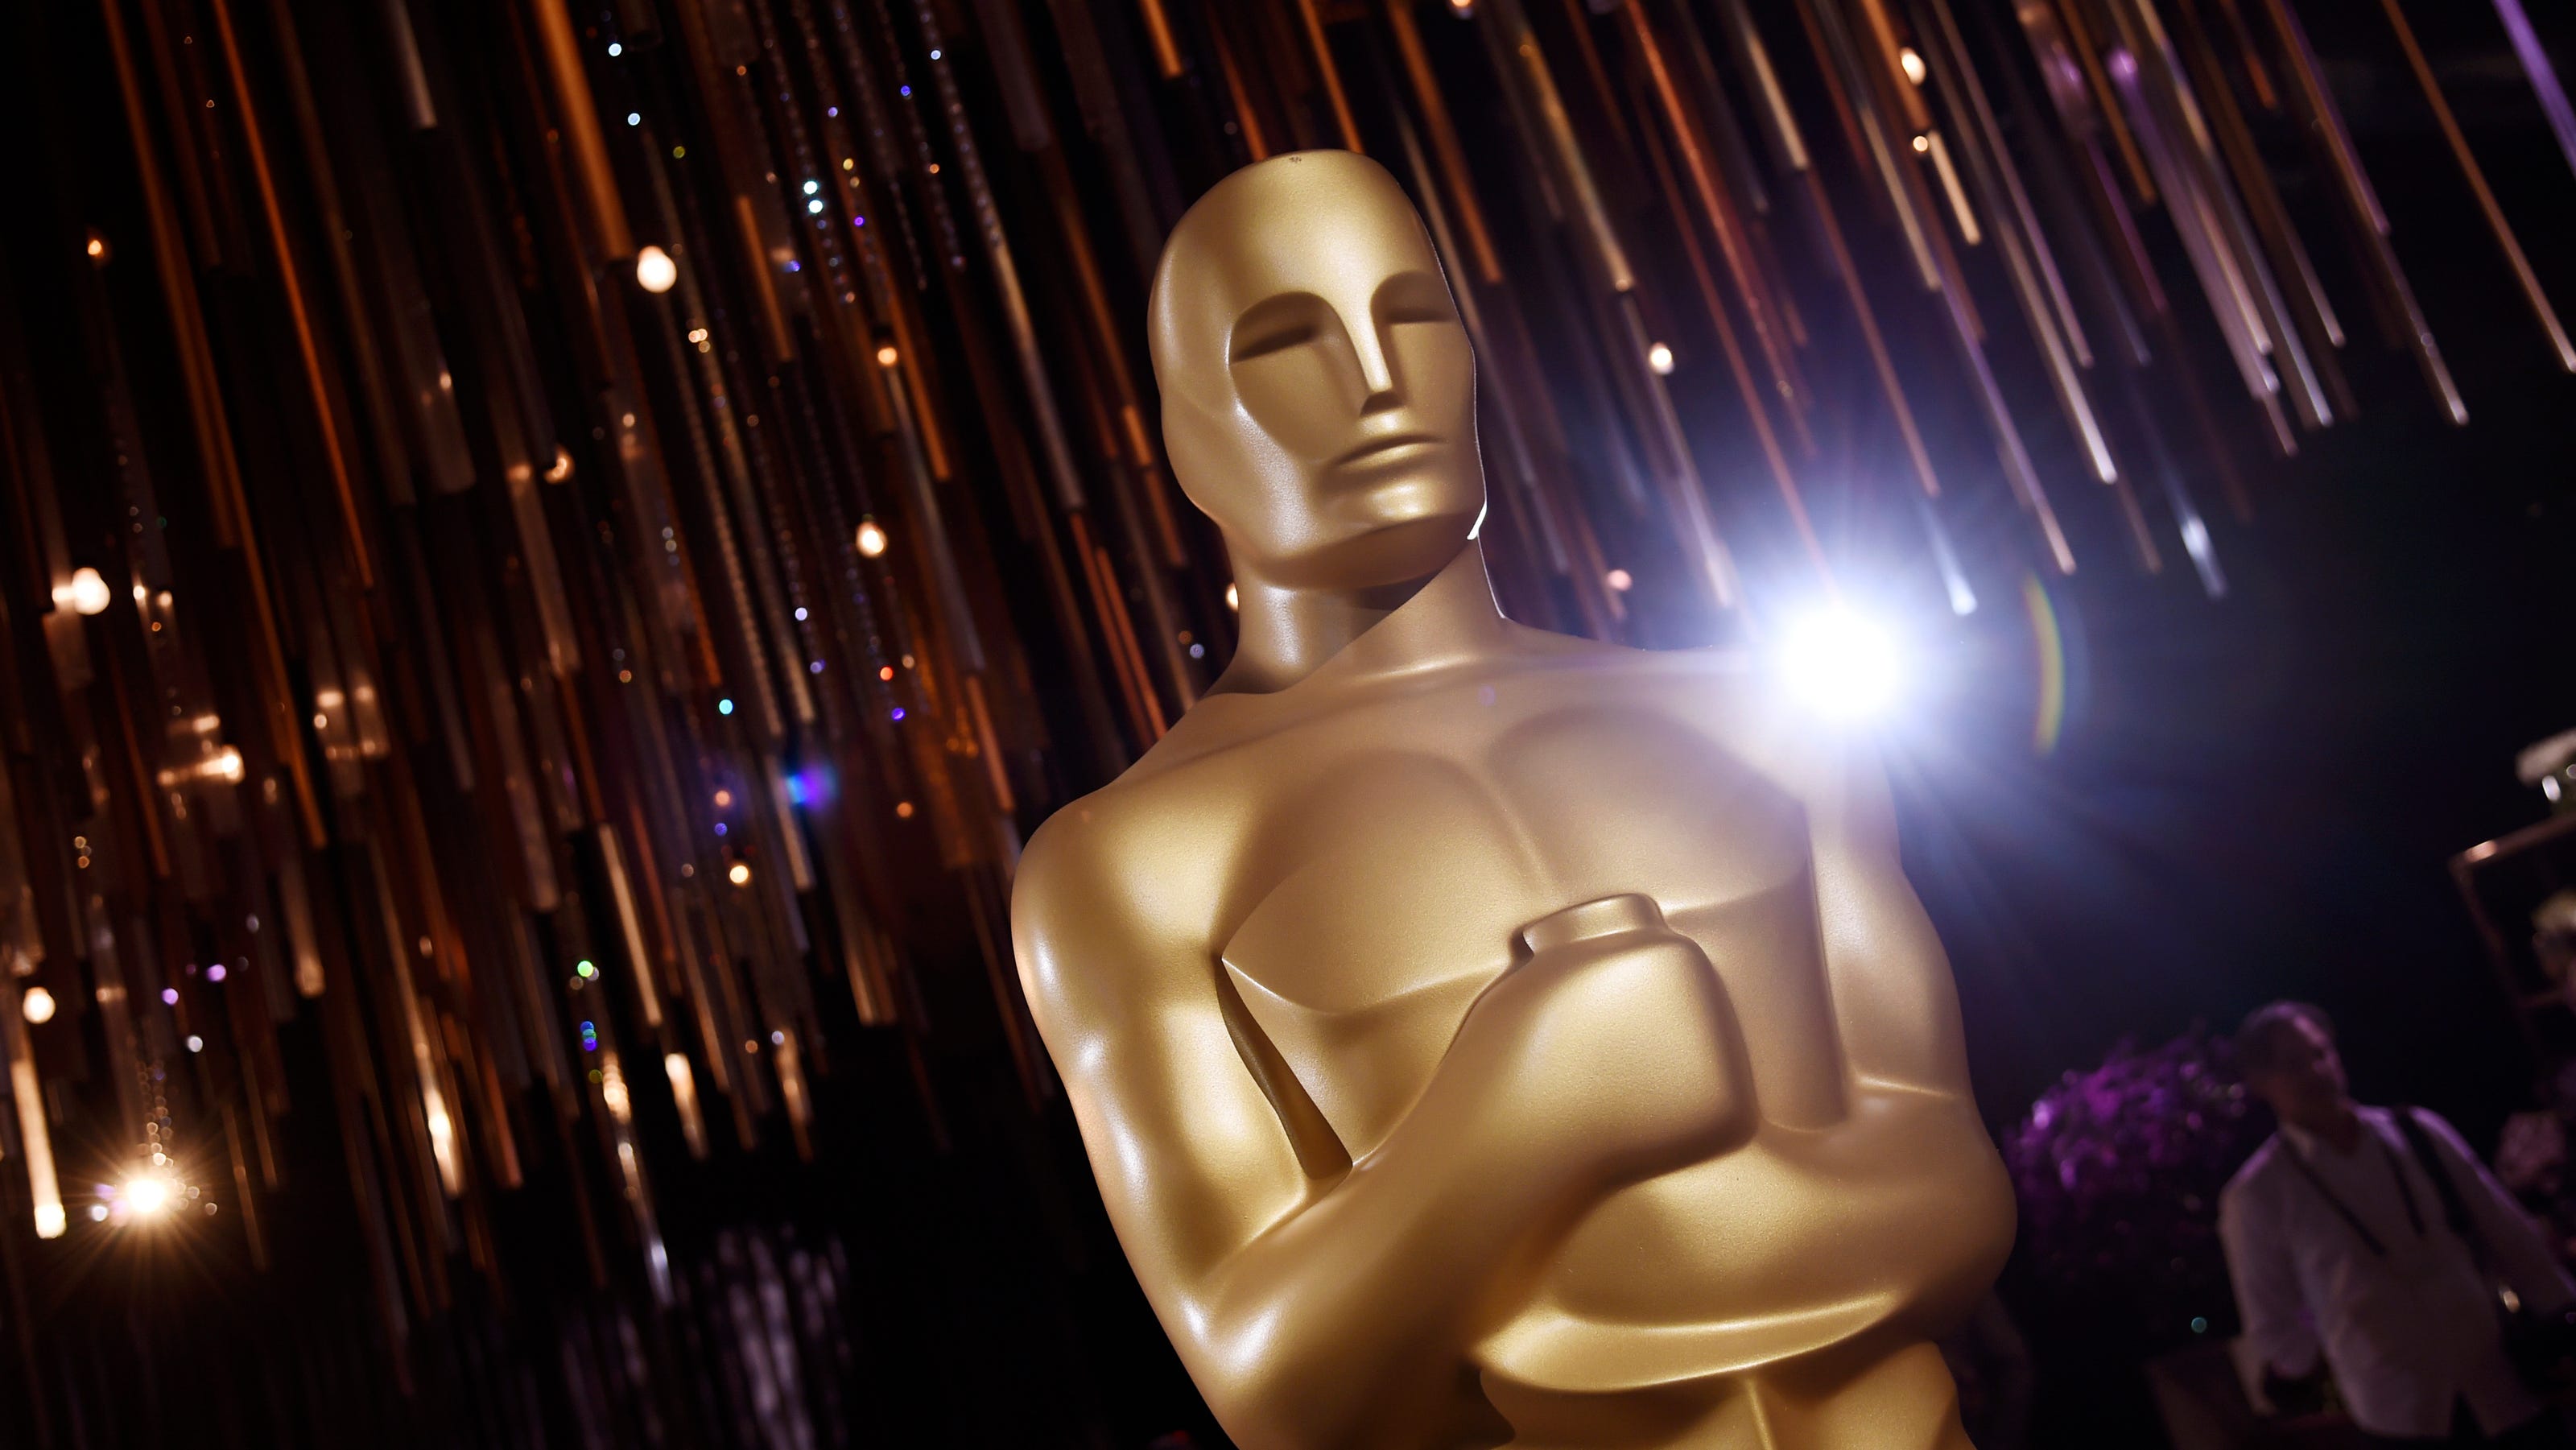 Oscars 2020: Here's how to watch and who's hosting the Academy Awards3200 x 1801